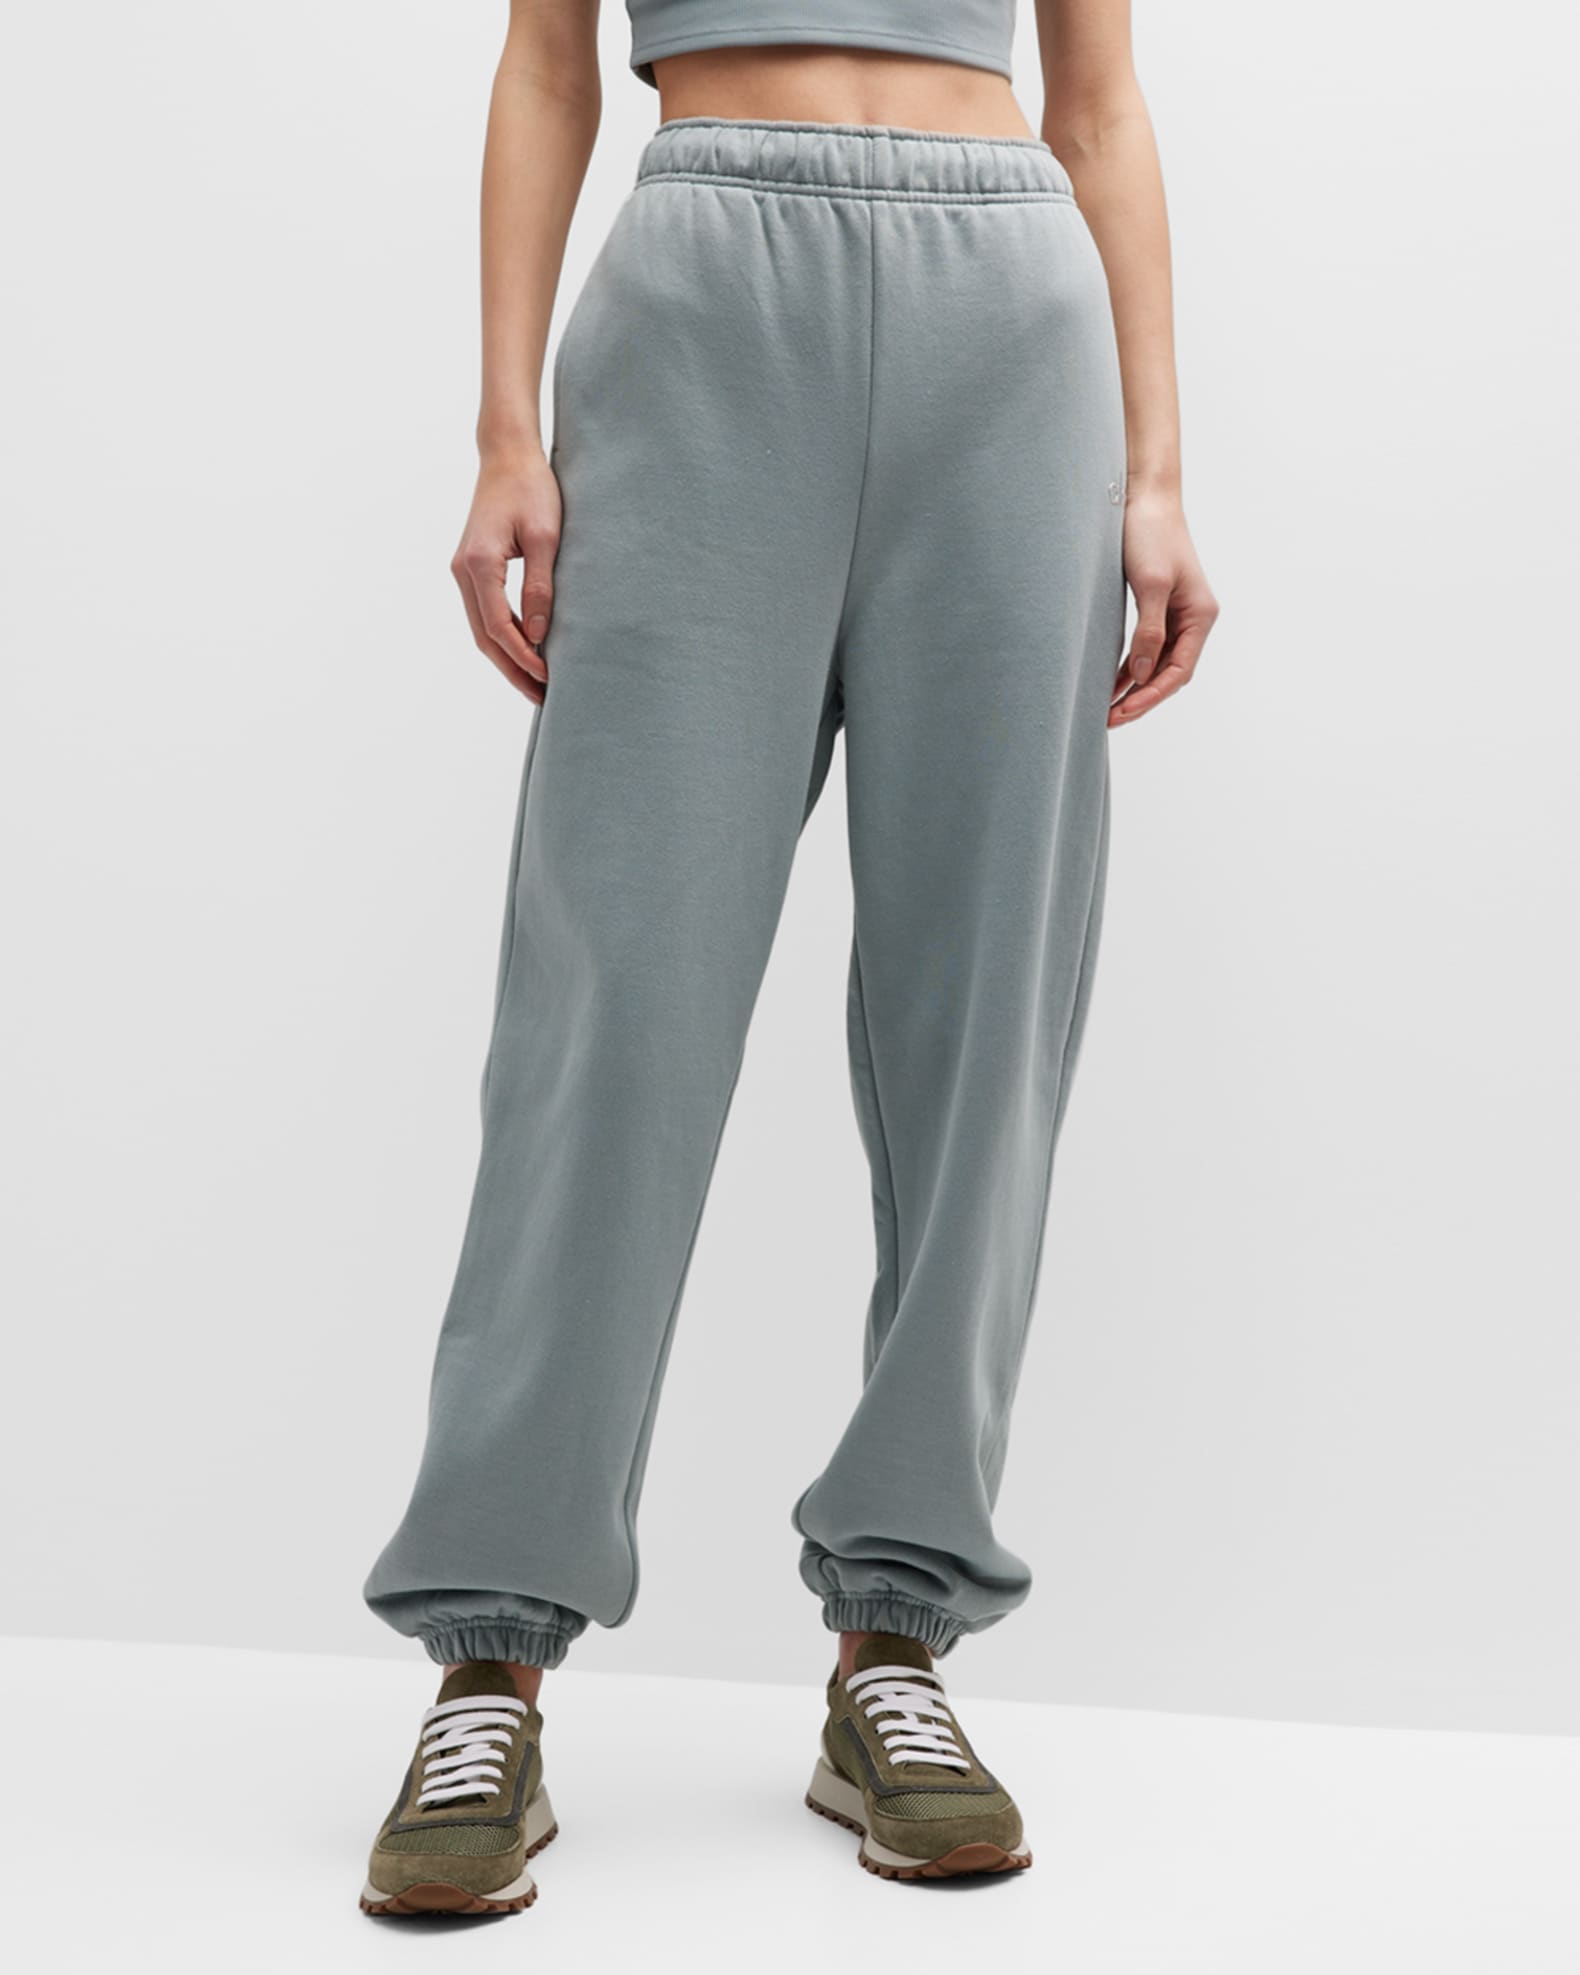 alo Accolade Sweatpant in Cosmic Grey